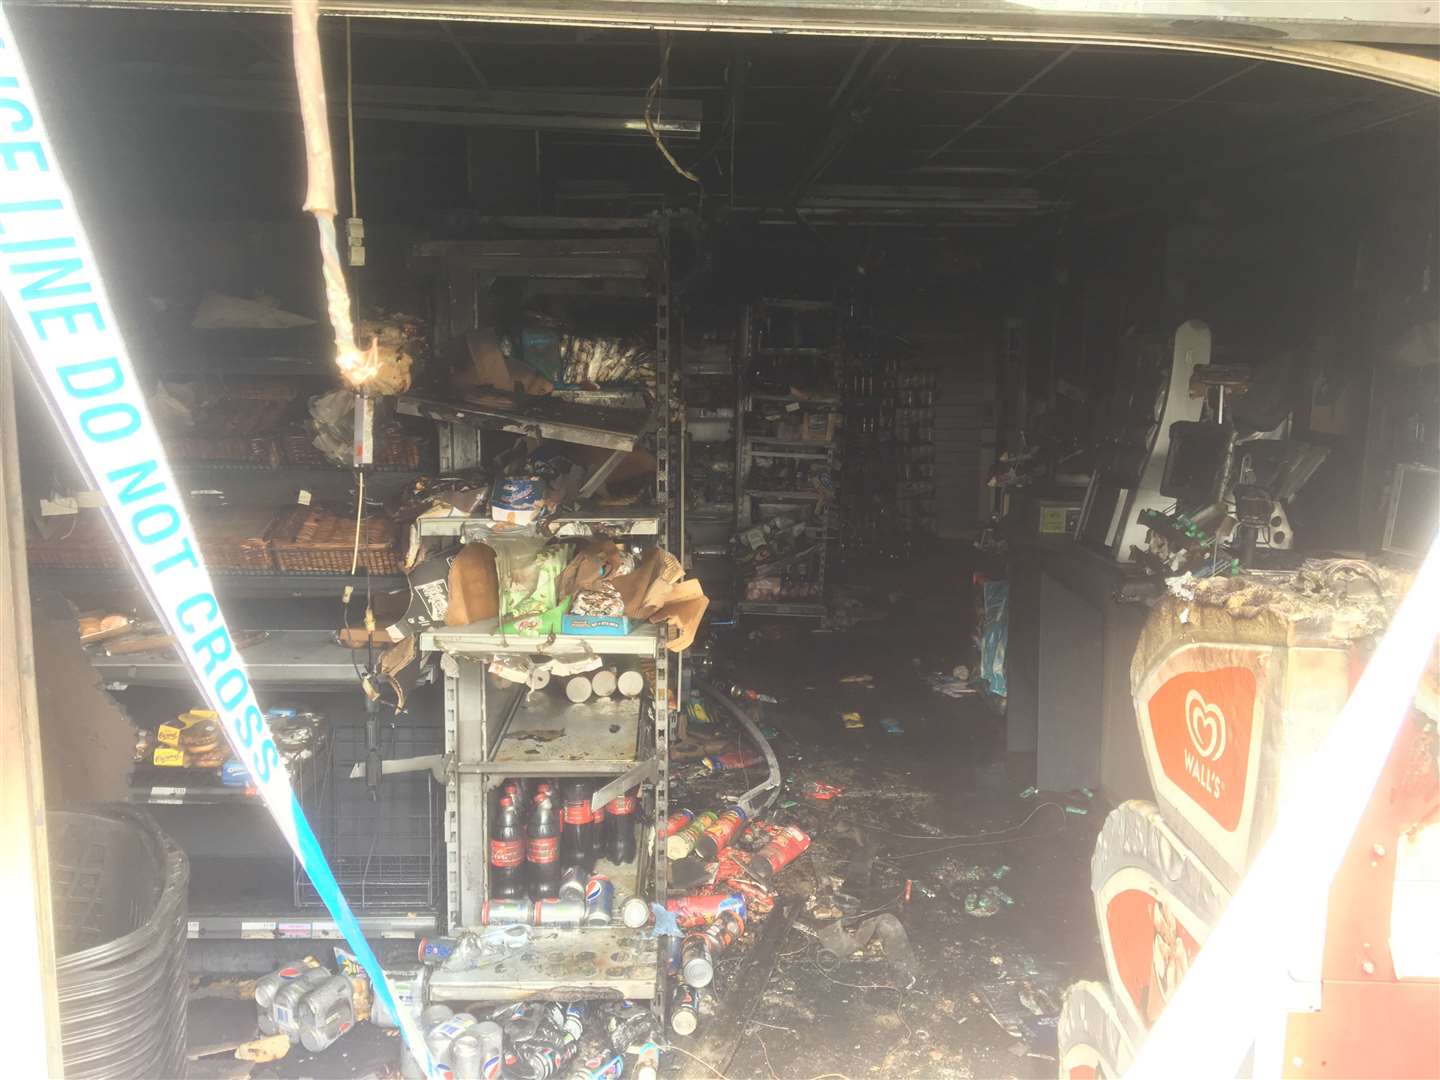 The fire tore through the shop